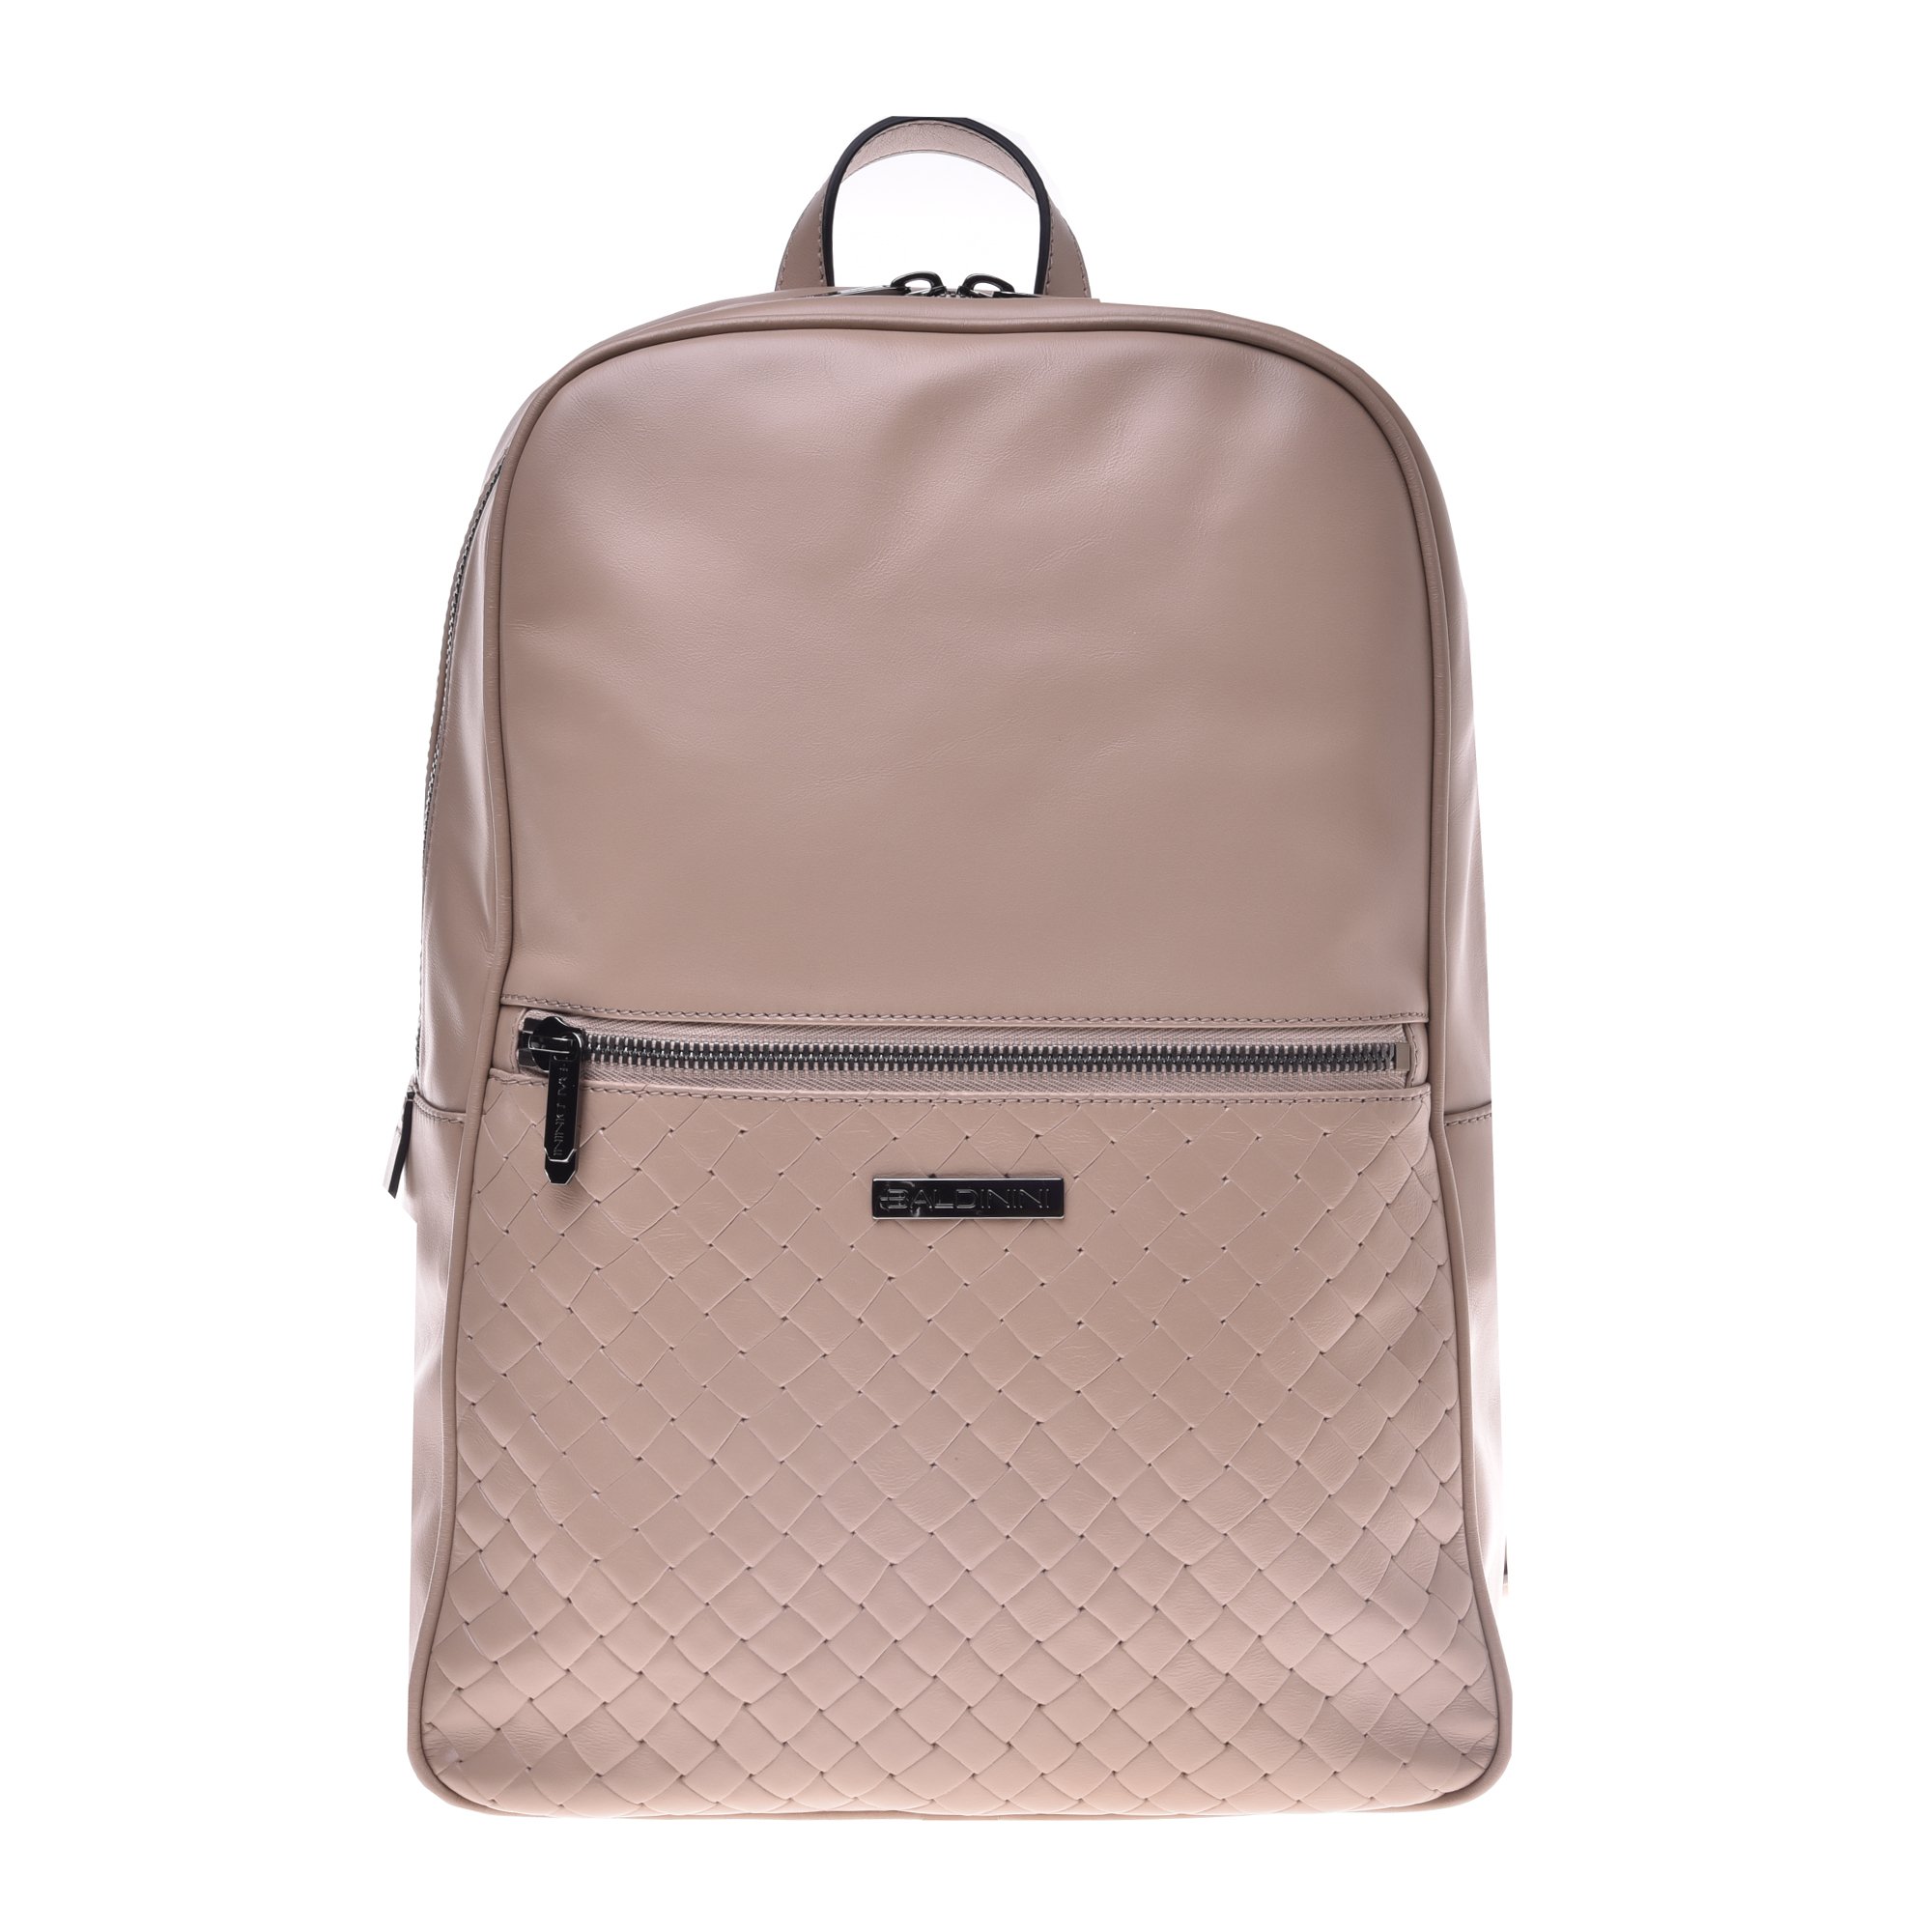 Backpack in taupe woven leather image